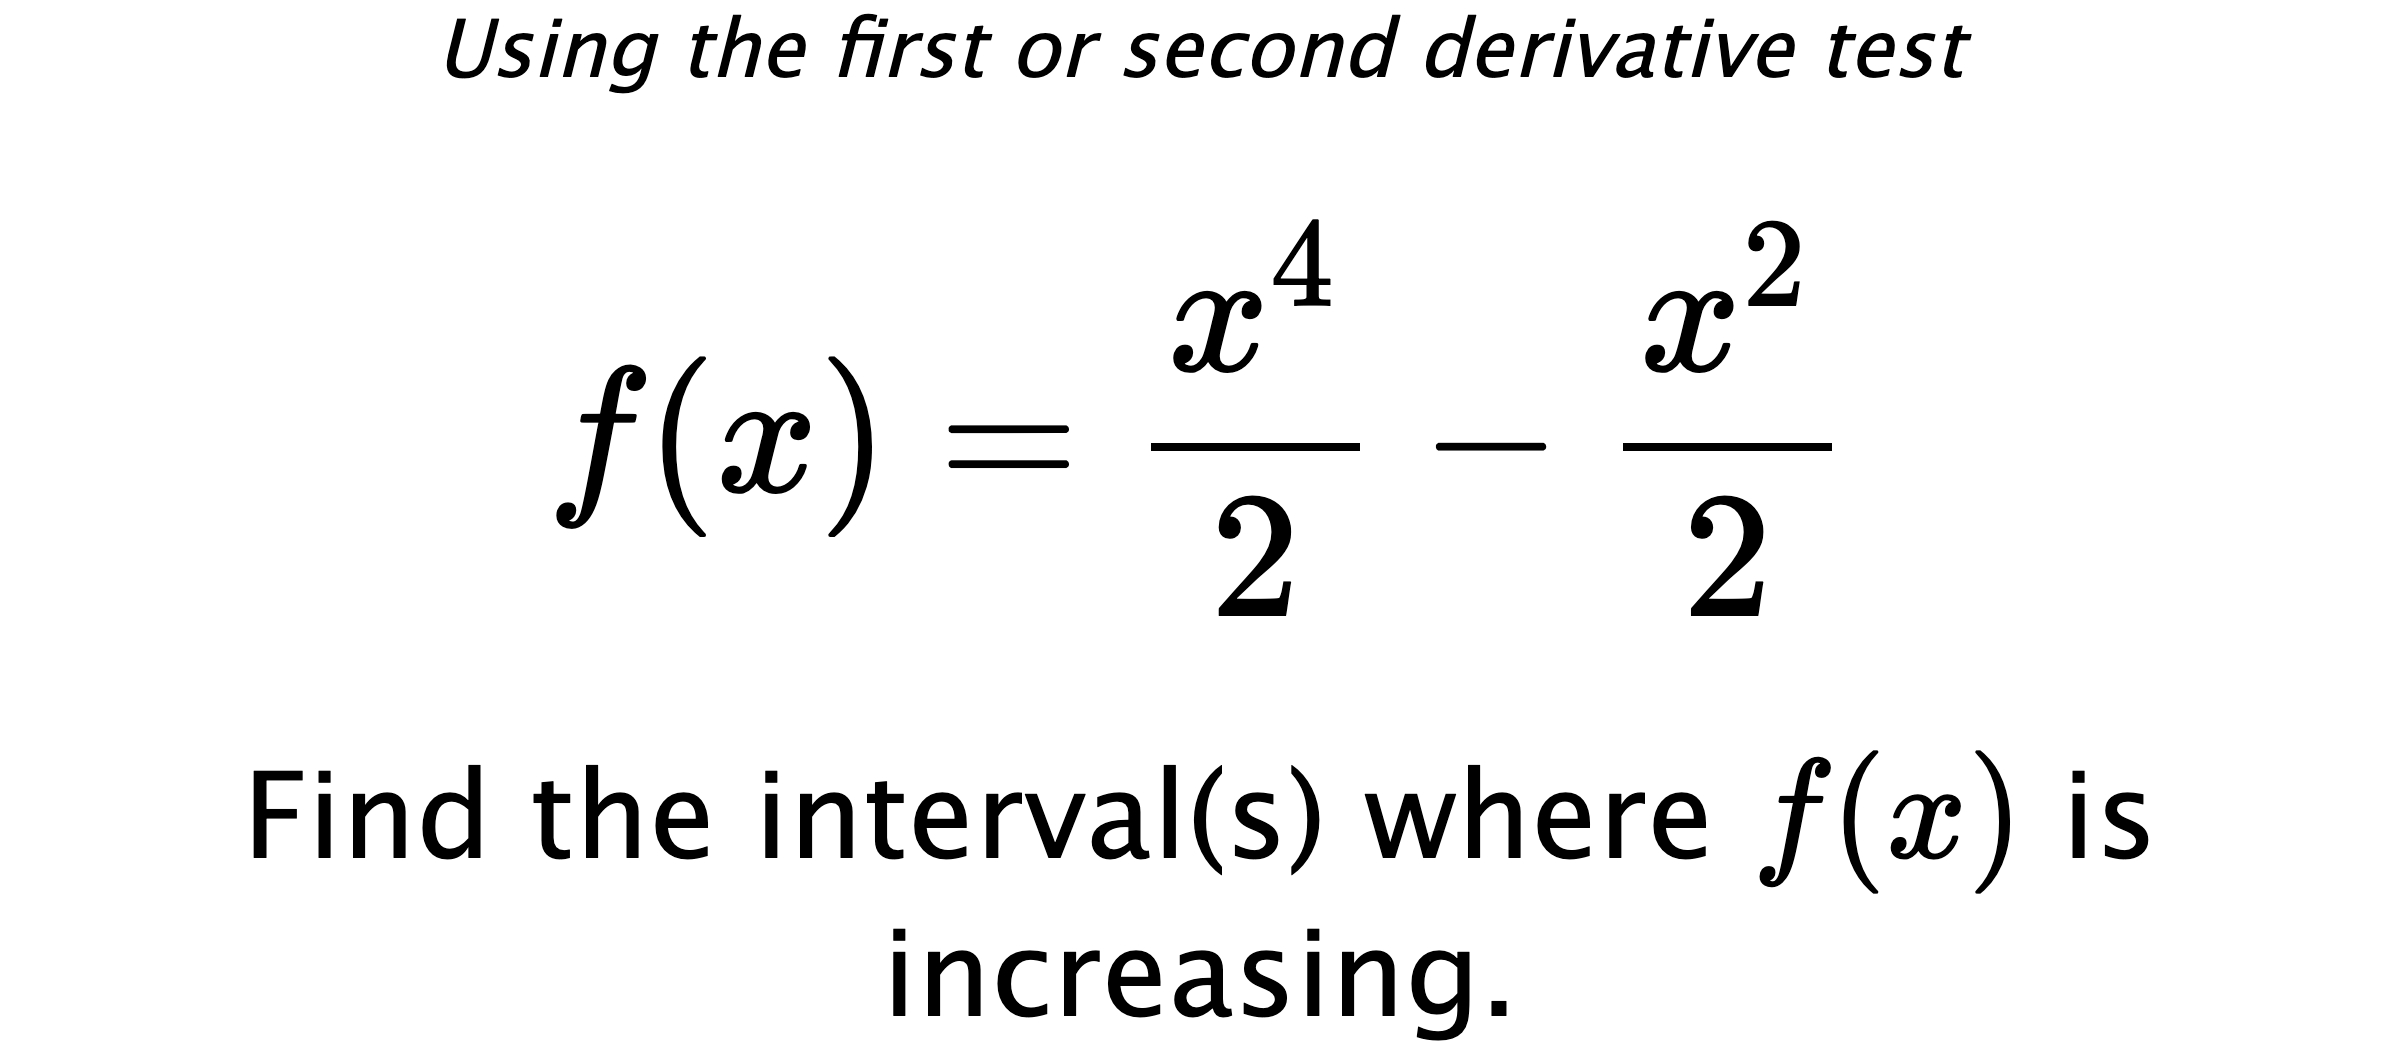 Using the first or second derivative test $$ f(x)=\frac{x^4}{2}-\frac{x^2}{2} $$ Find the interval(s) where $ f(x) $ is increasing.